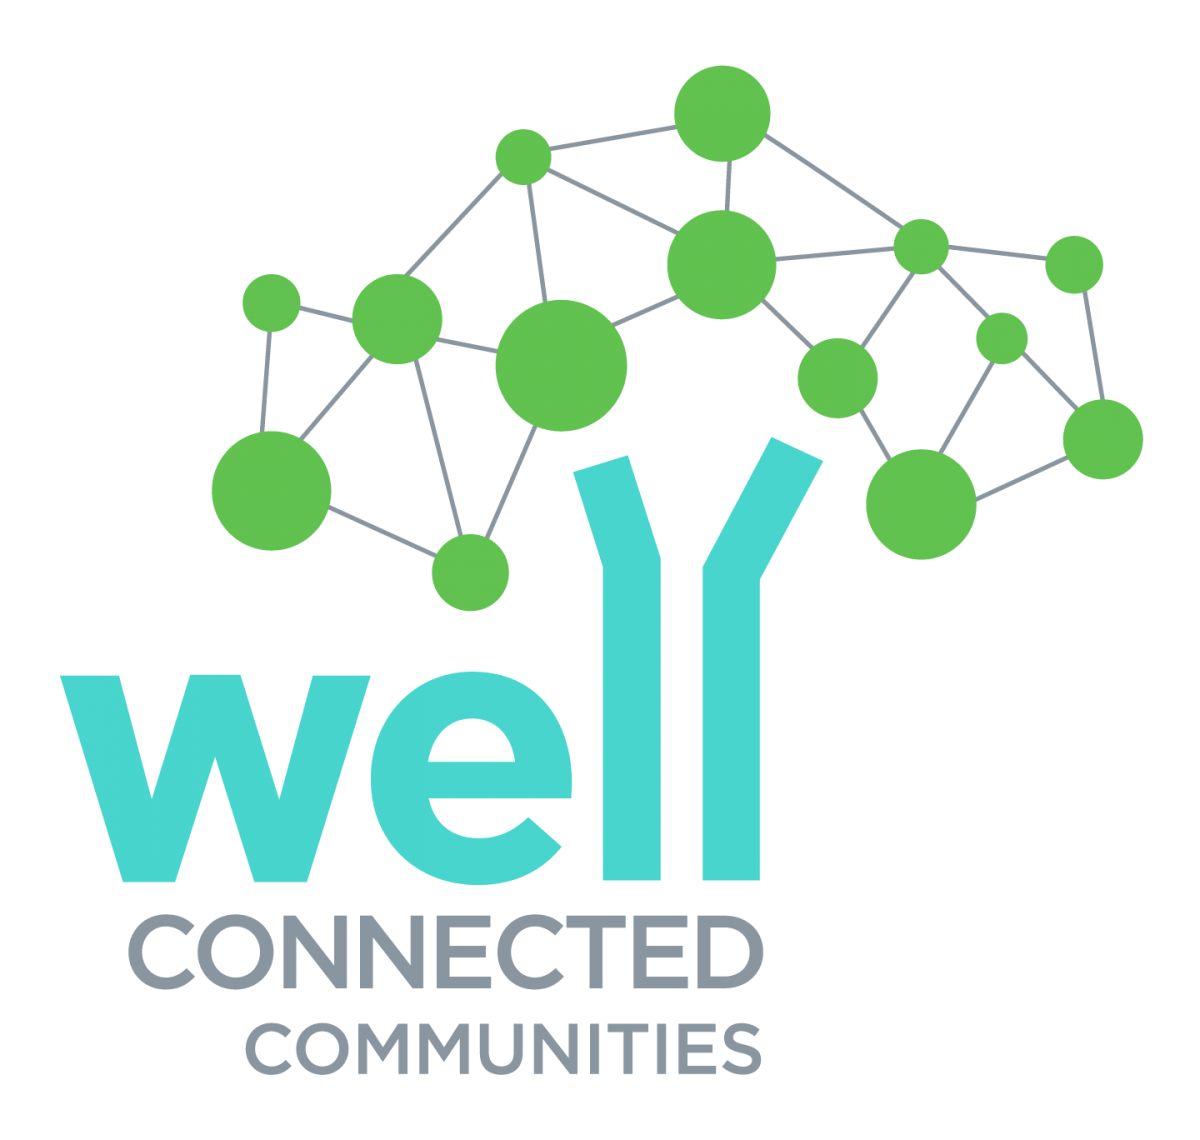 Well Connected Communites Logo for public health